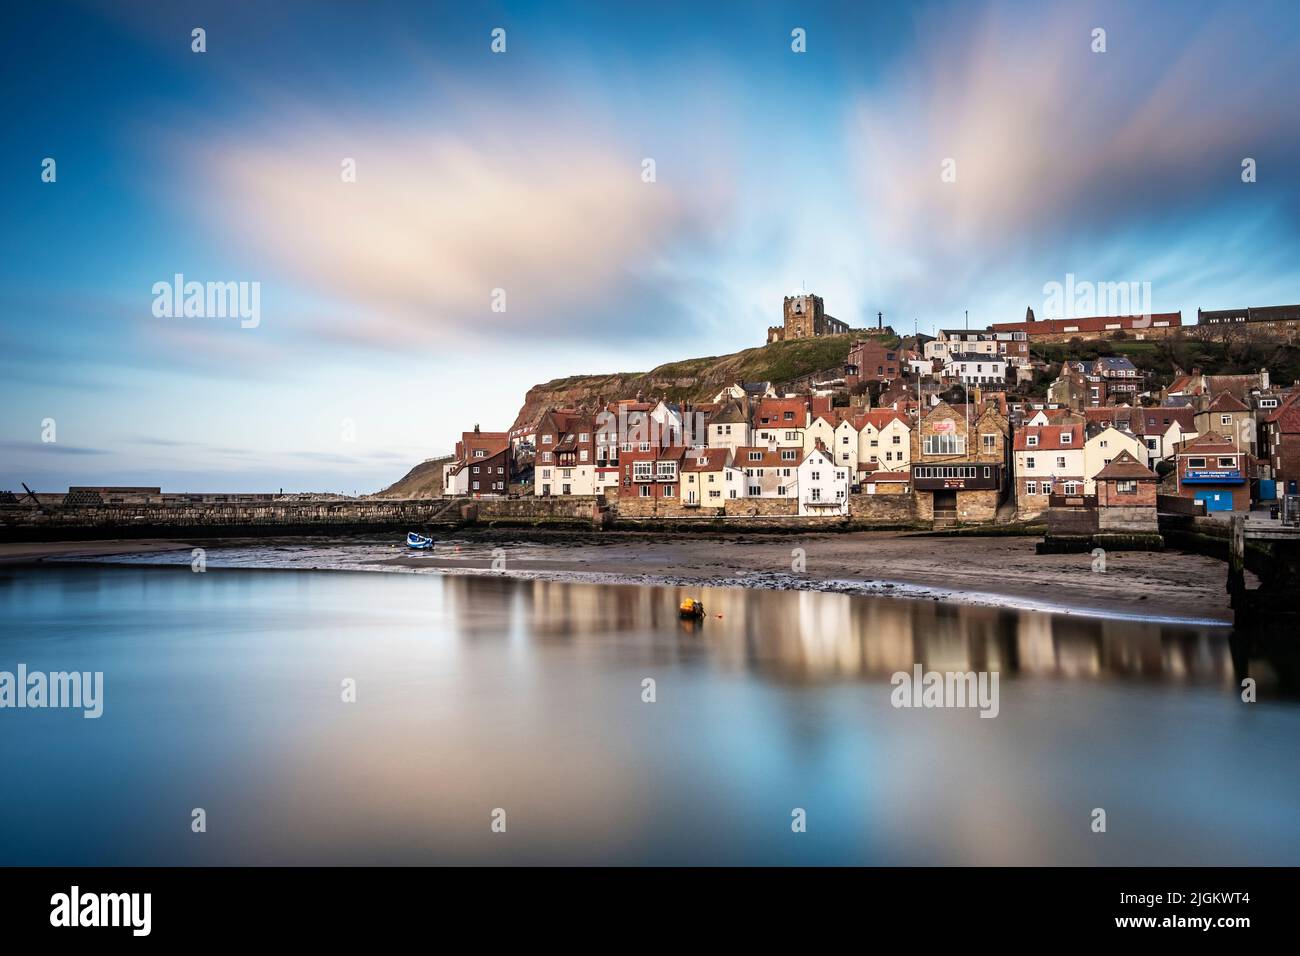 4 minute exposure at Whitby with St. Mary's Church on the hill Stock Photo